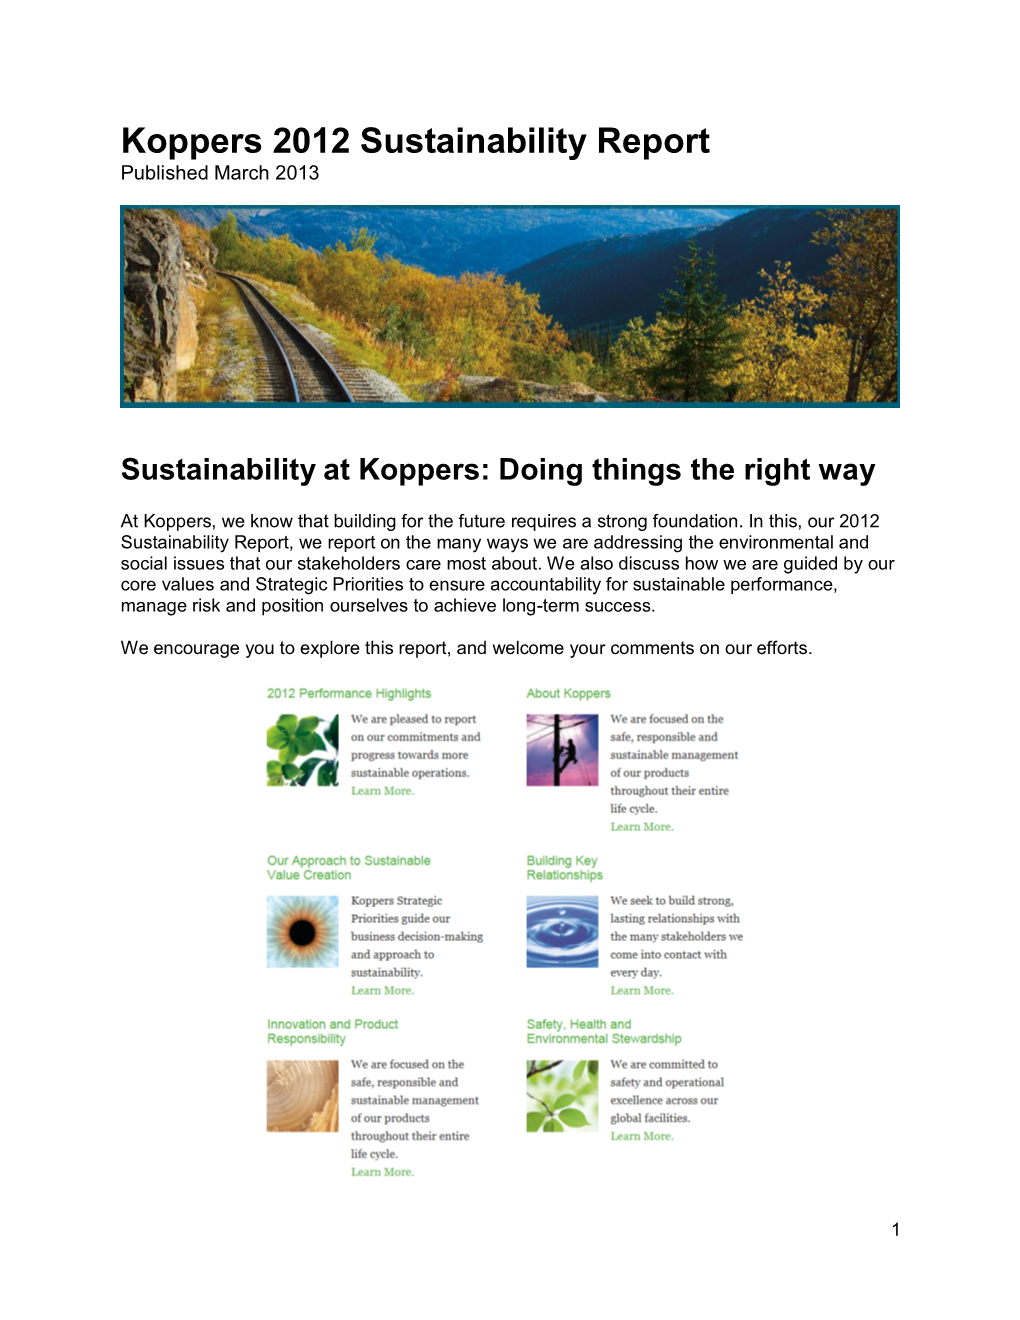 Koppers 2012 Sustainability Report Published March 2013